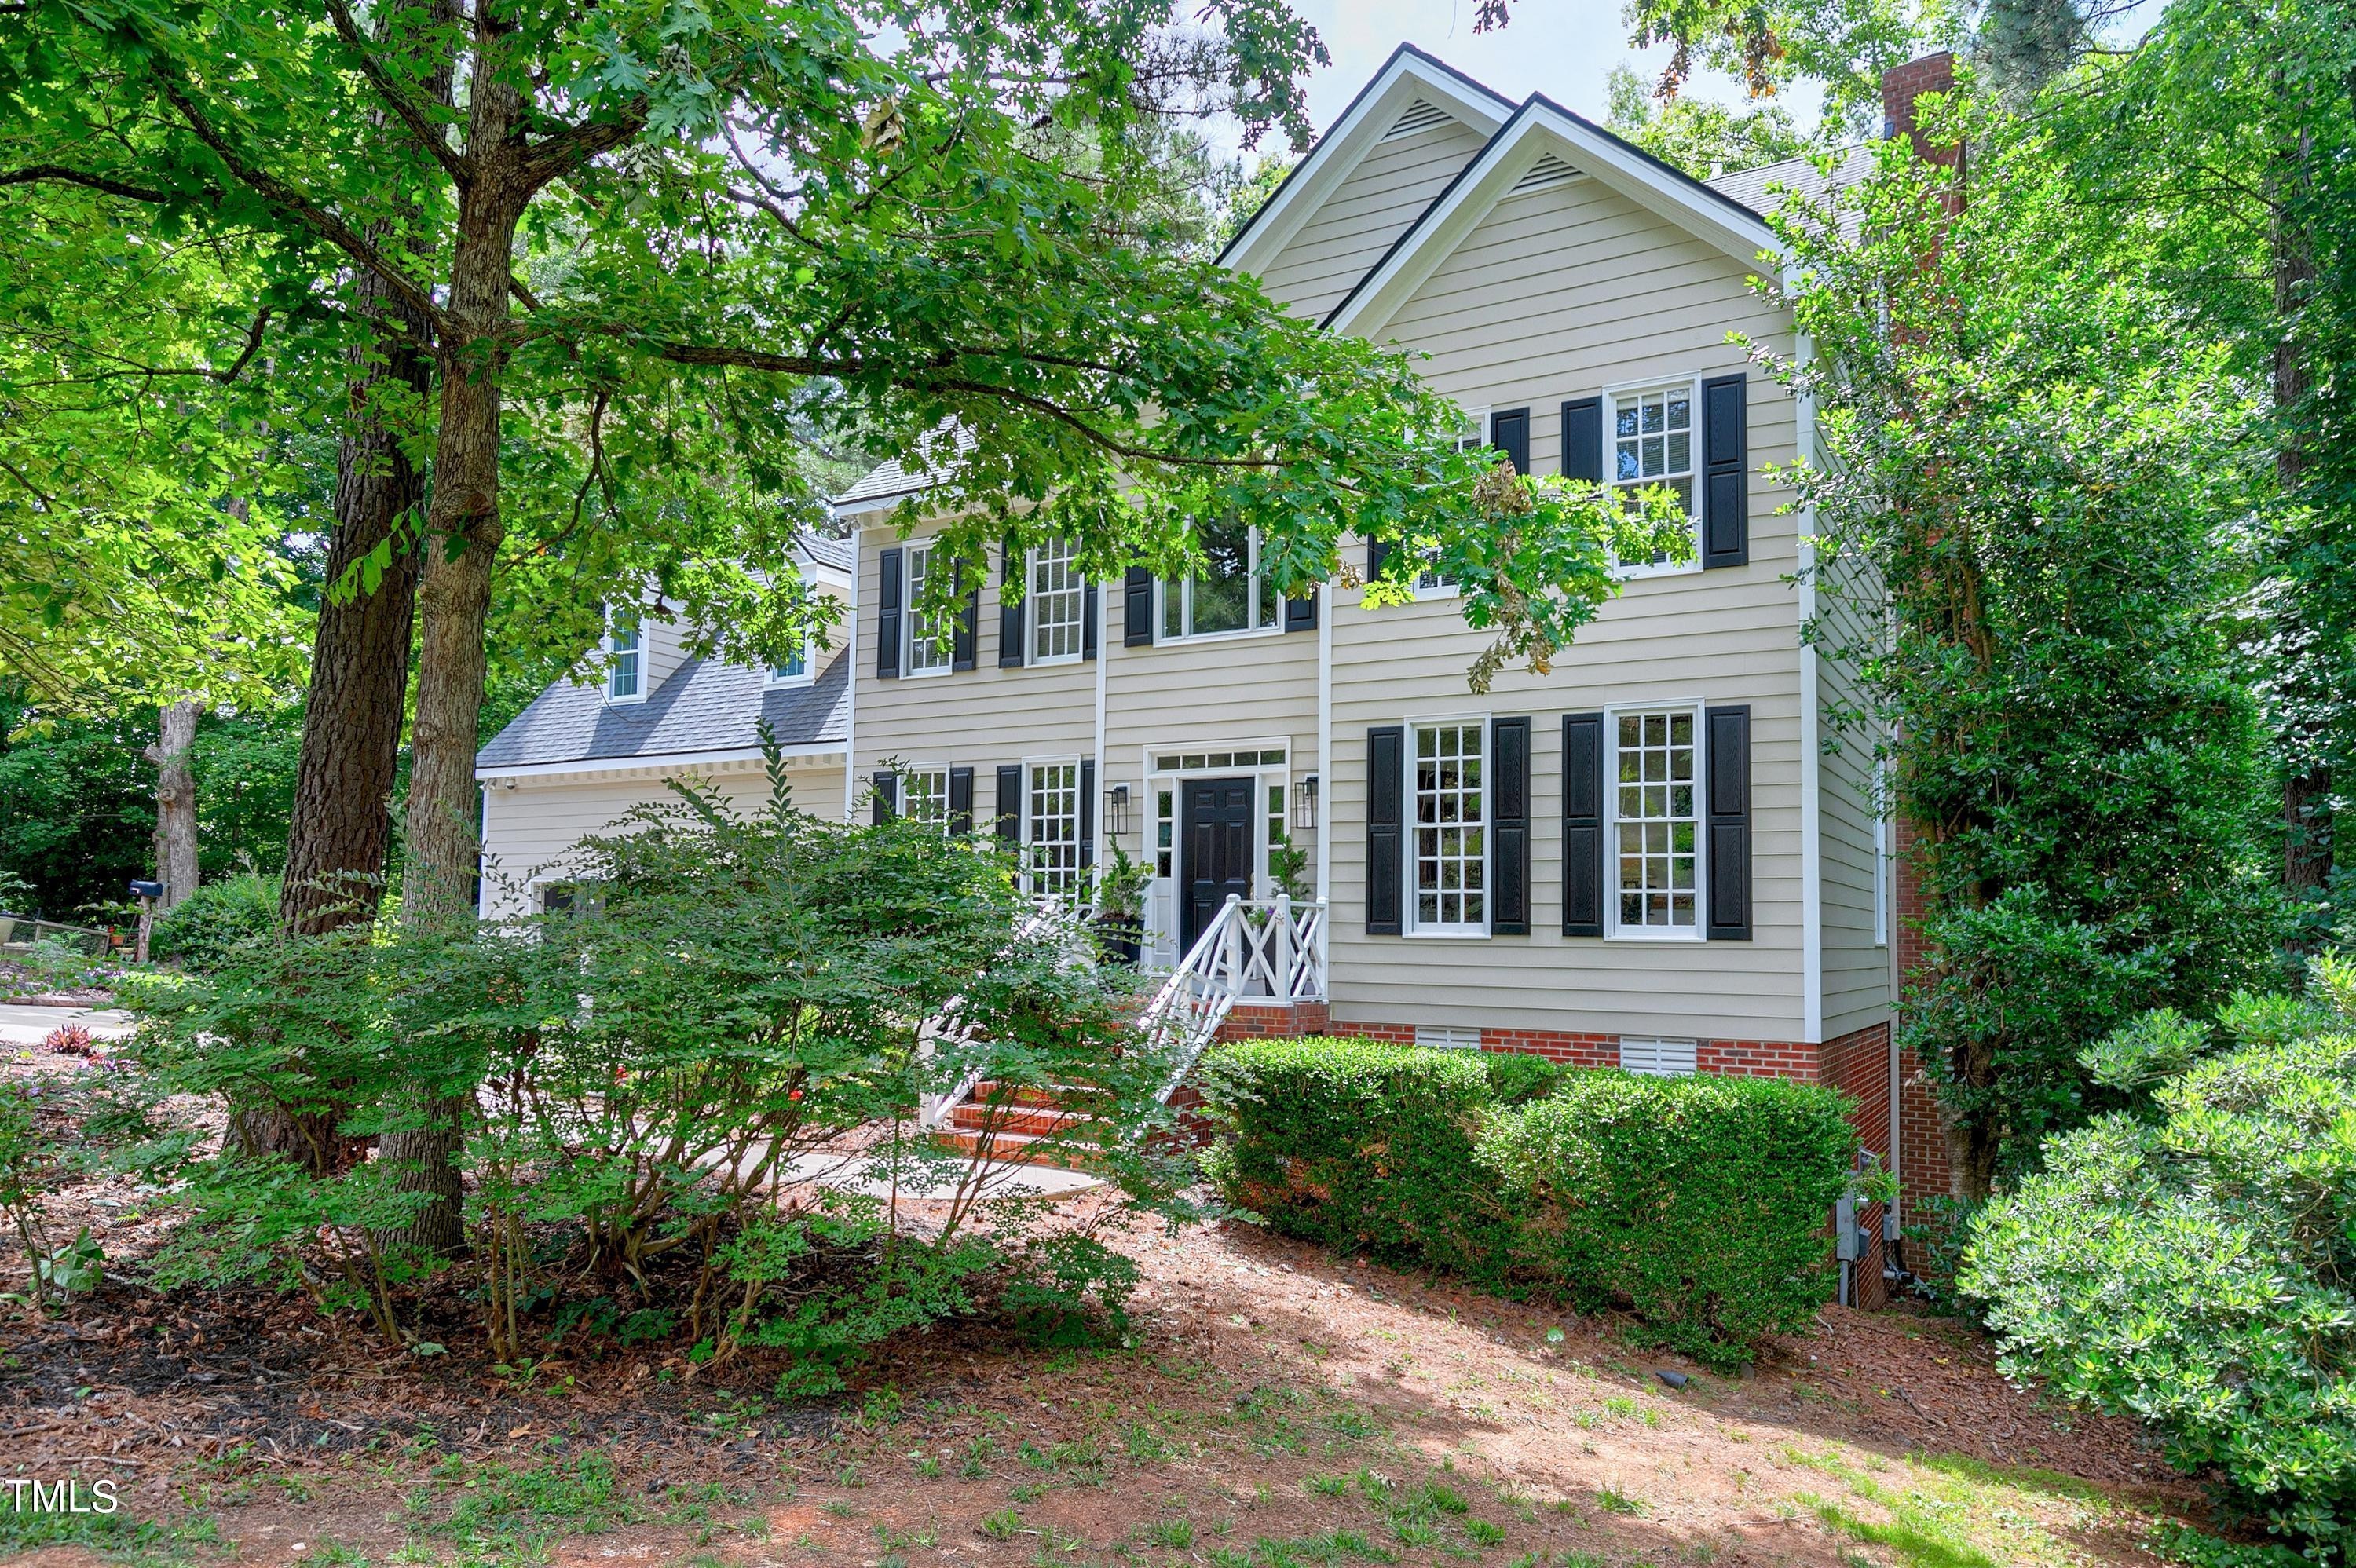 1. 108 Whittlewood Drive, Cary Nc 27513